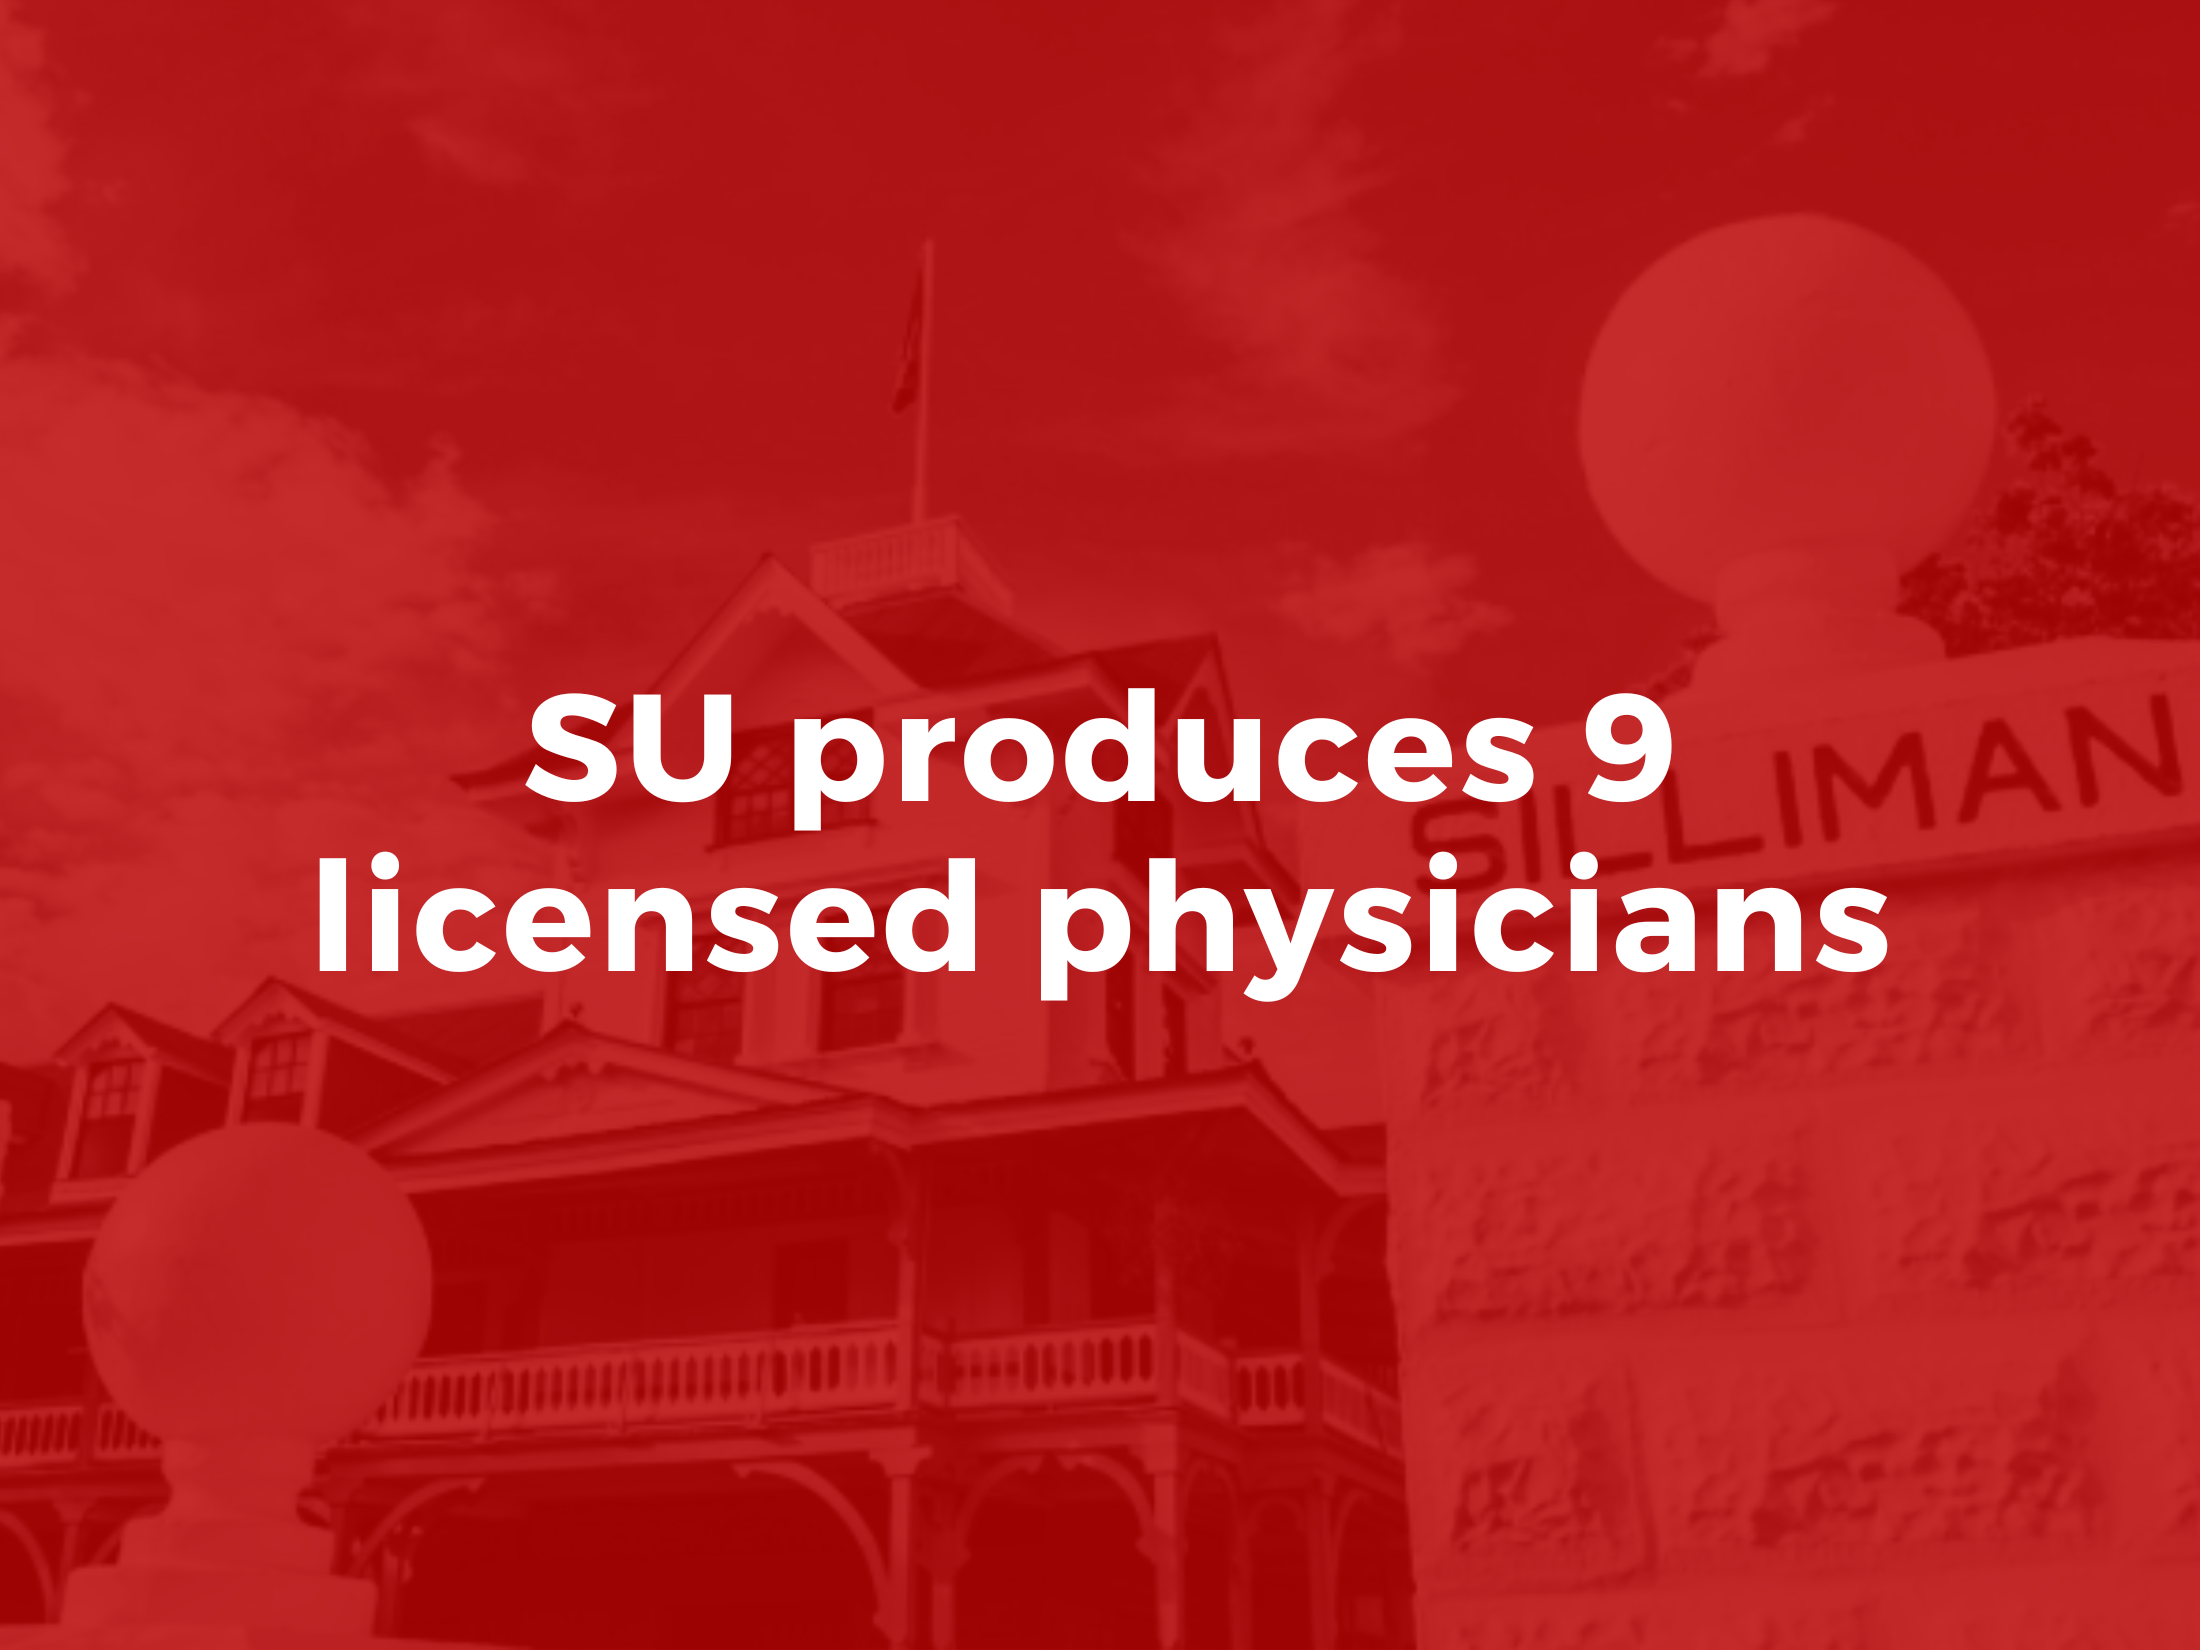 SU produces 9 licensed physicians